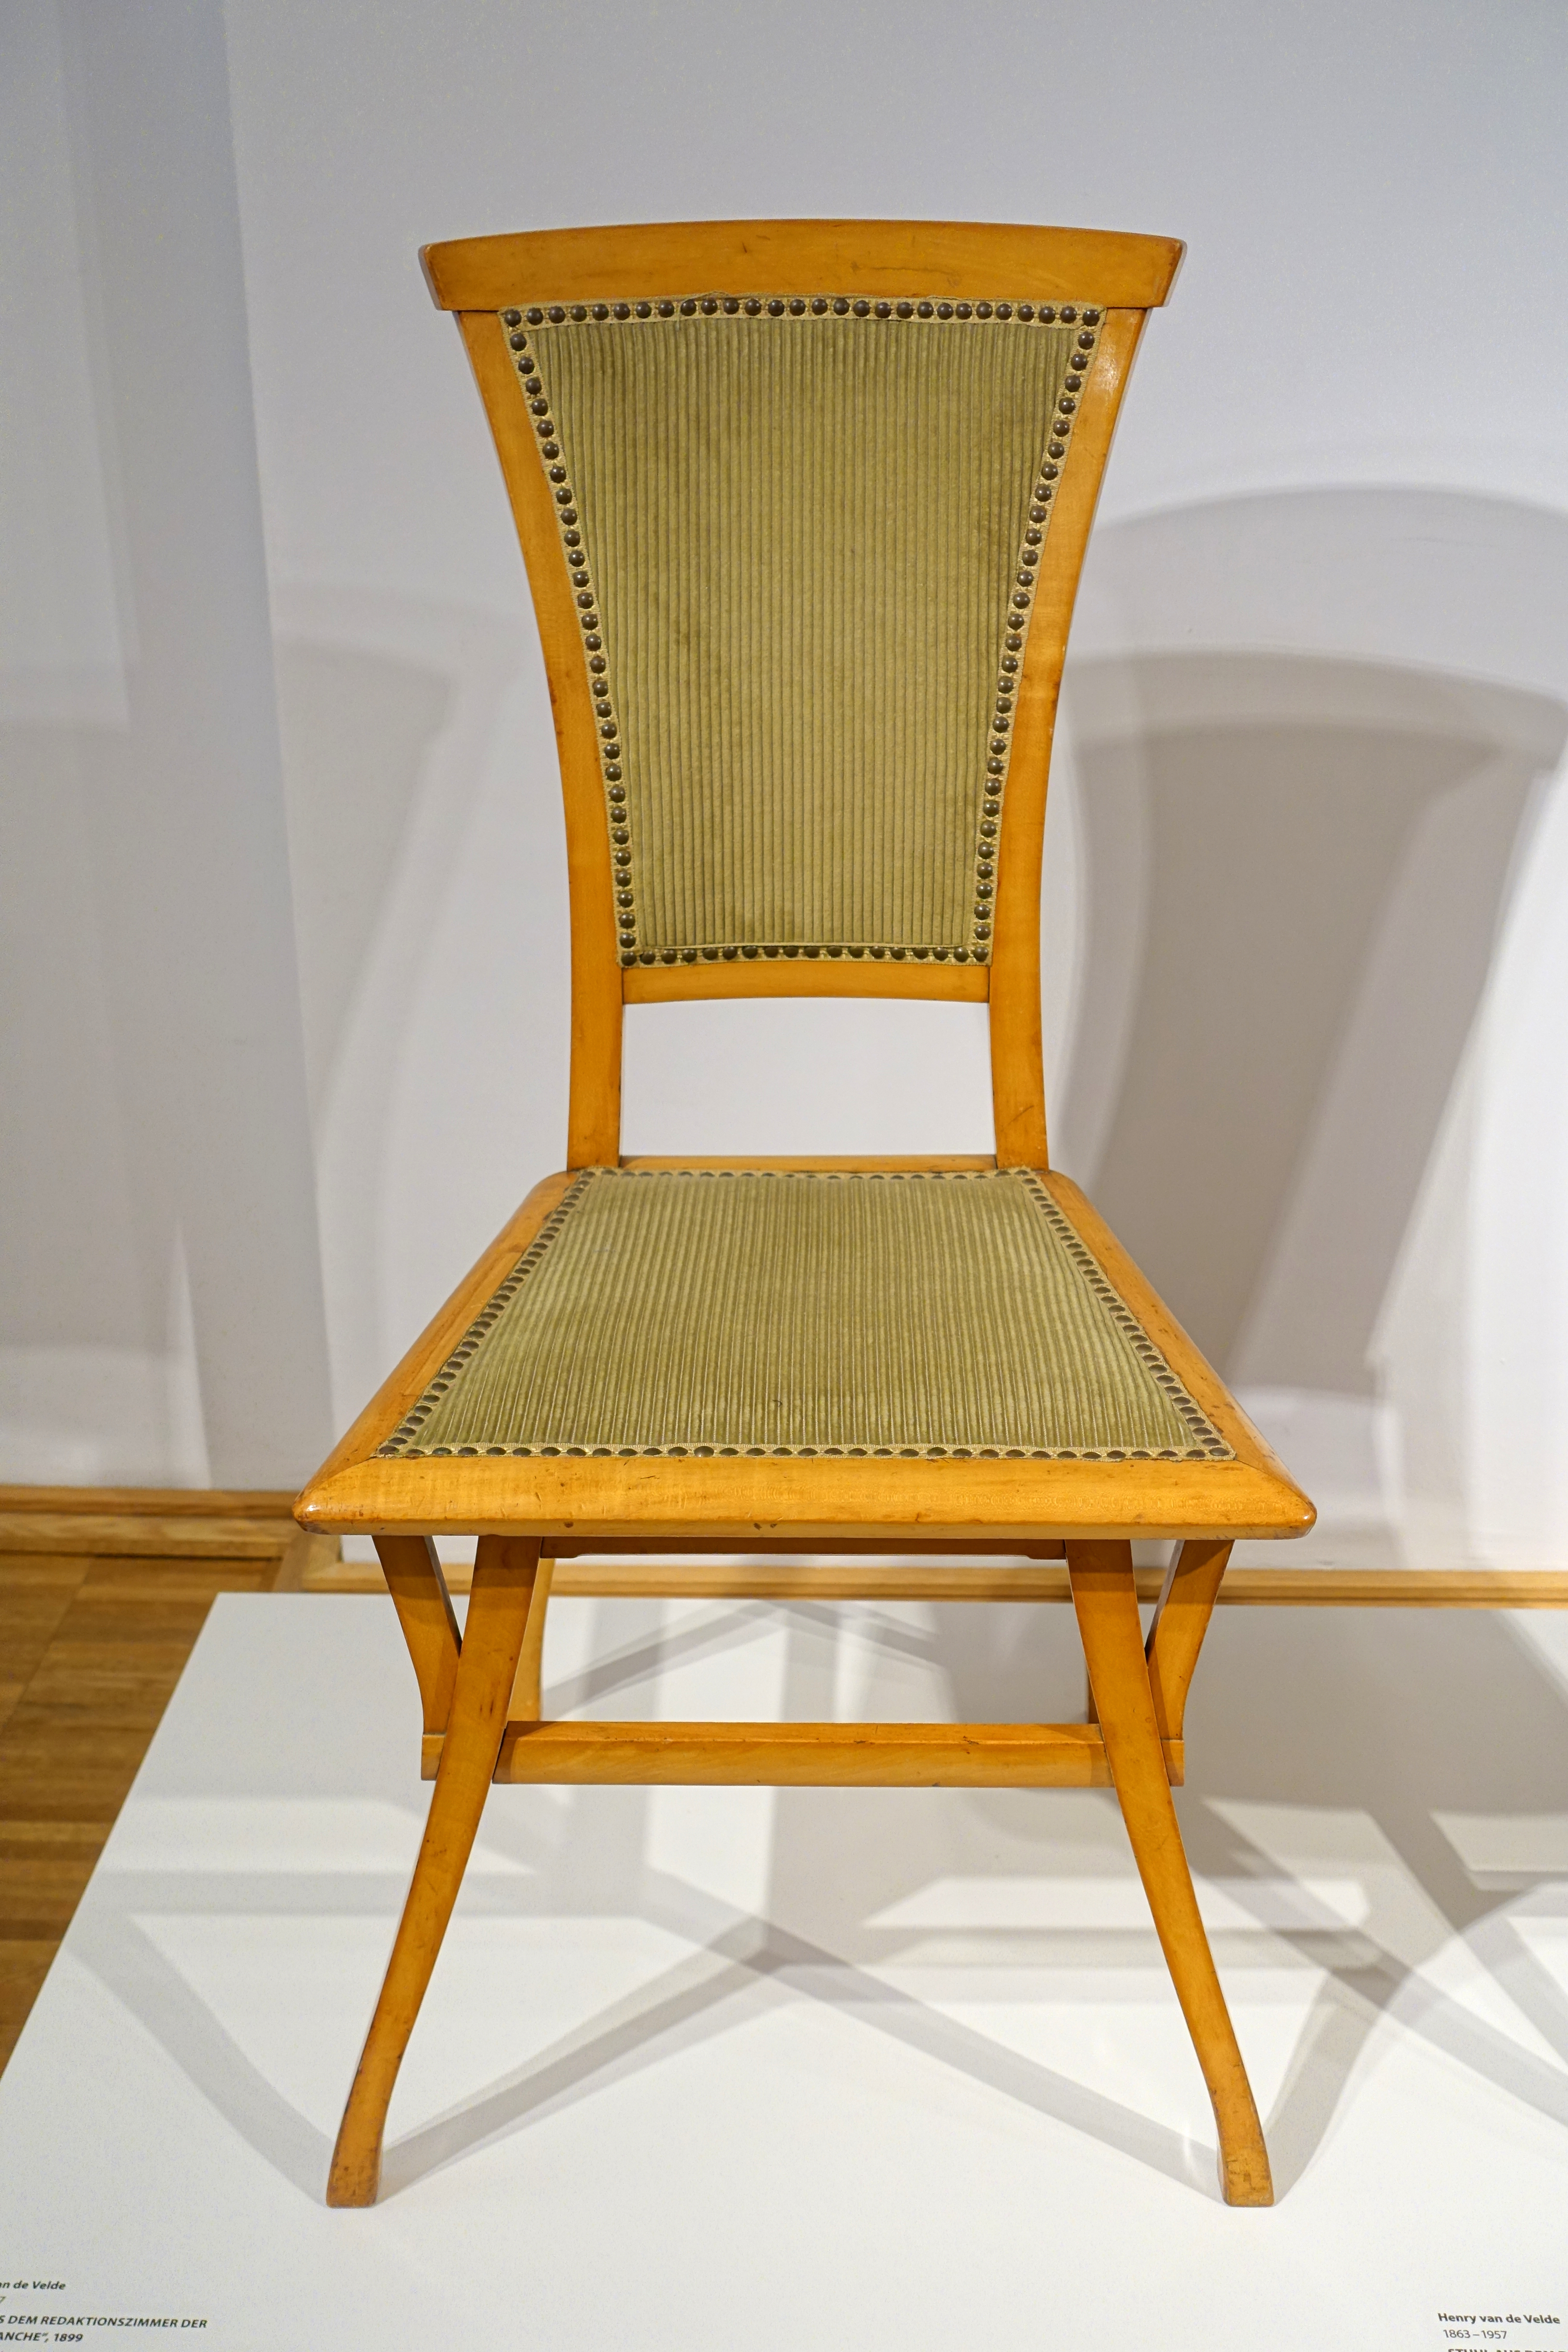 Chair from the editorial staff room of the Revue Blanche, by Henry van de Velde, 1899